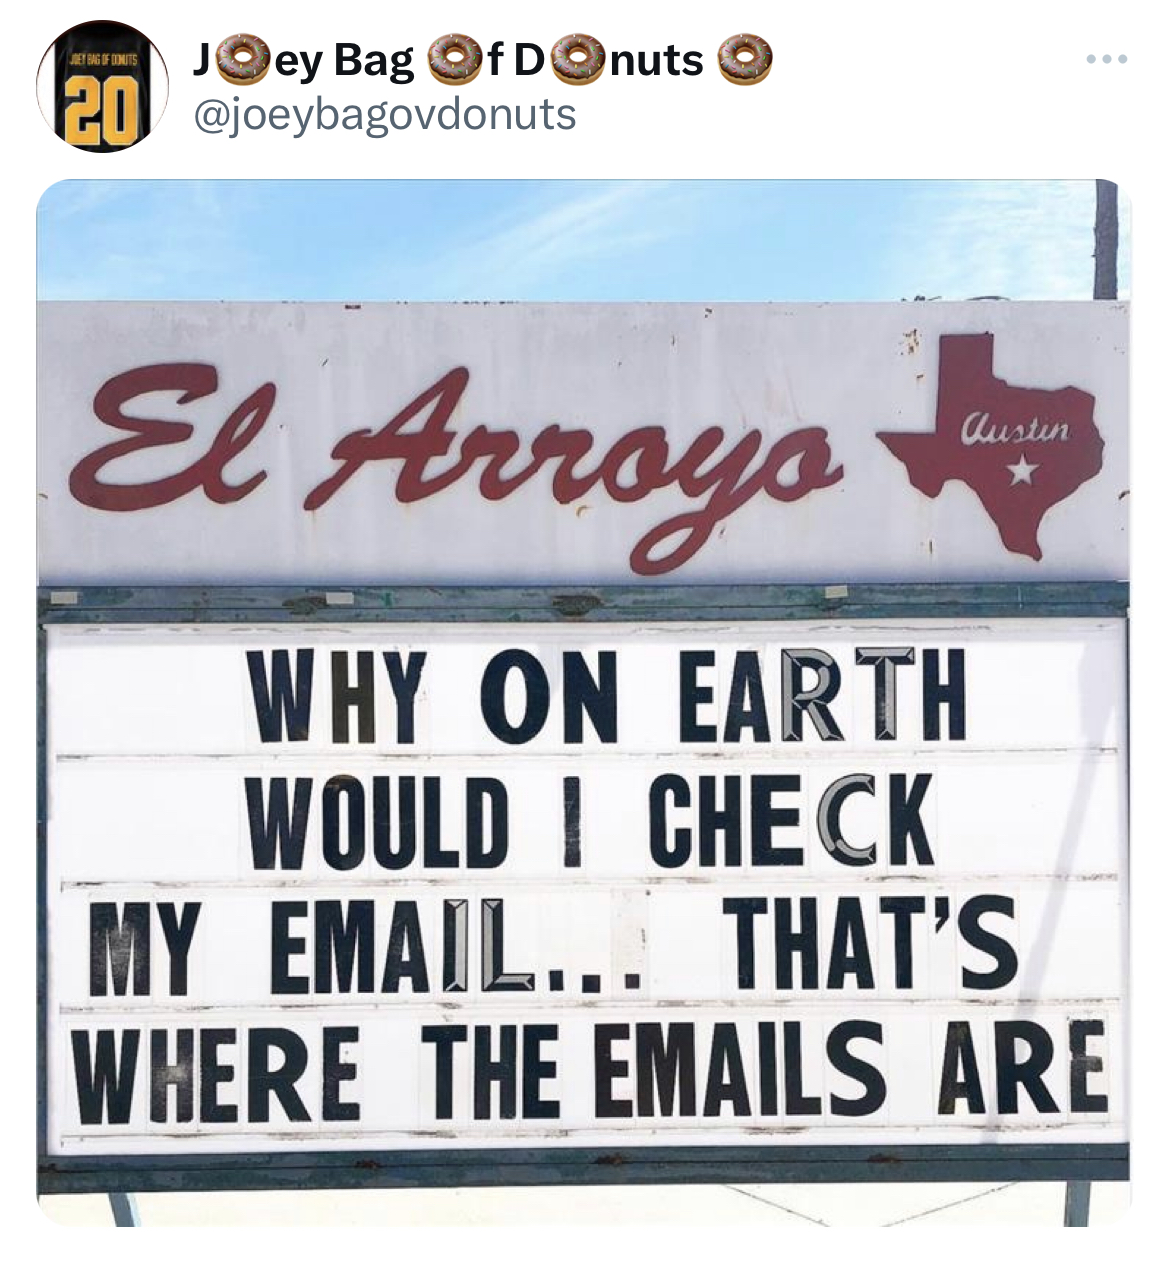 savage tweets - el arroyo - Joey Bag Of Donuts 20 El Arroyo Why On Earth Would I Check My Email... That'S Where The Emails Are Clusten